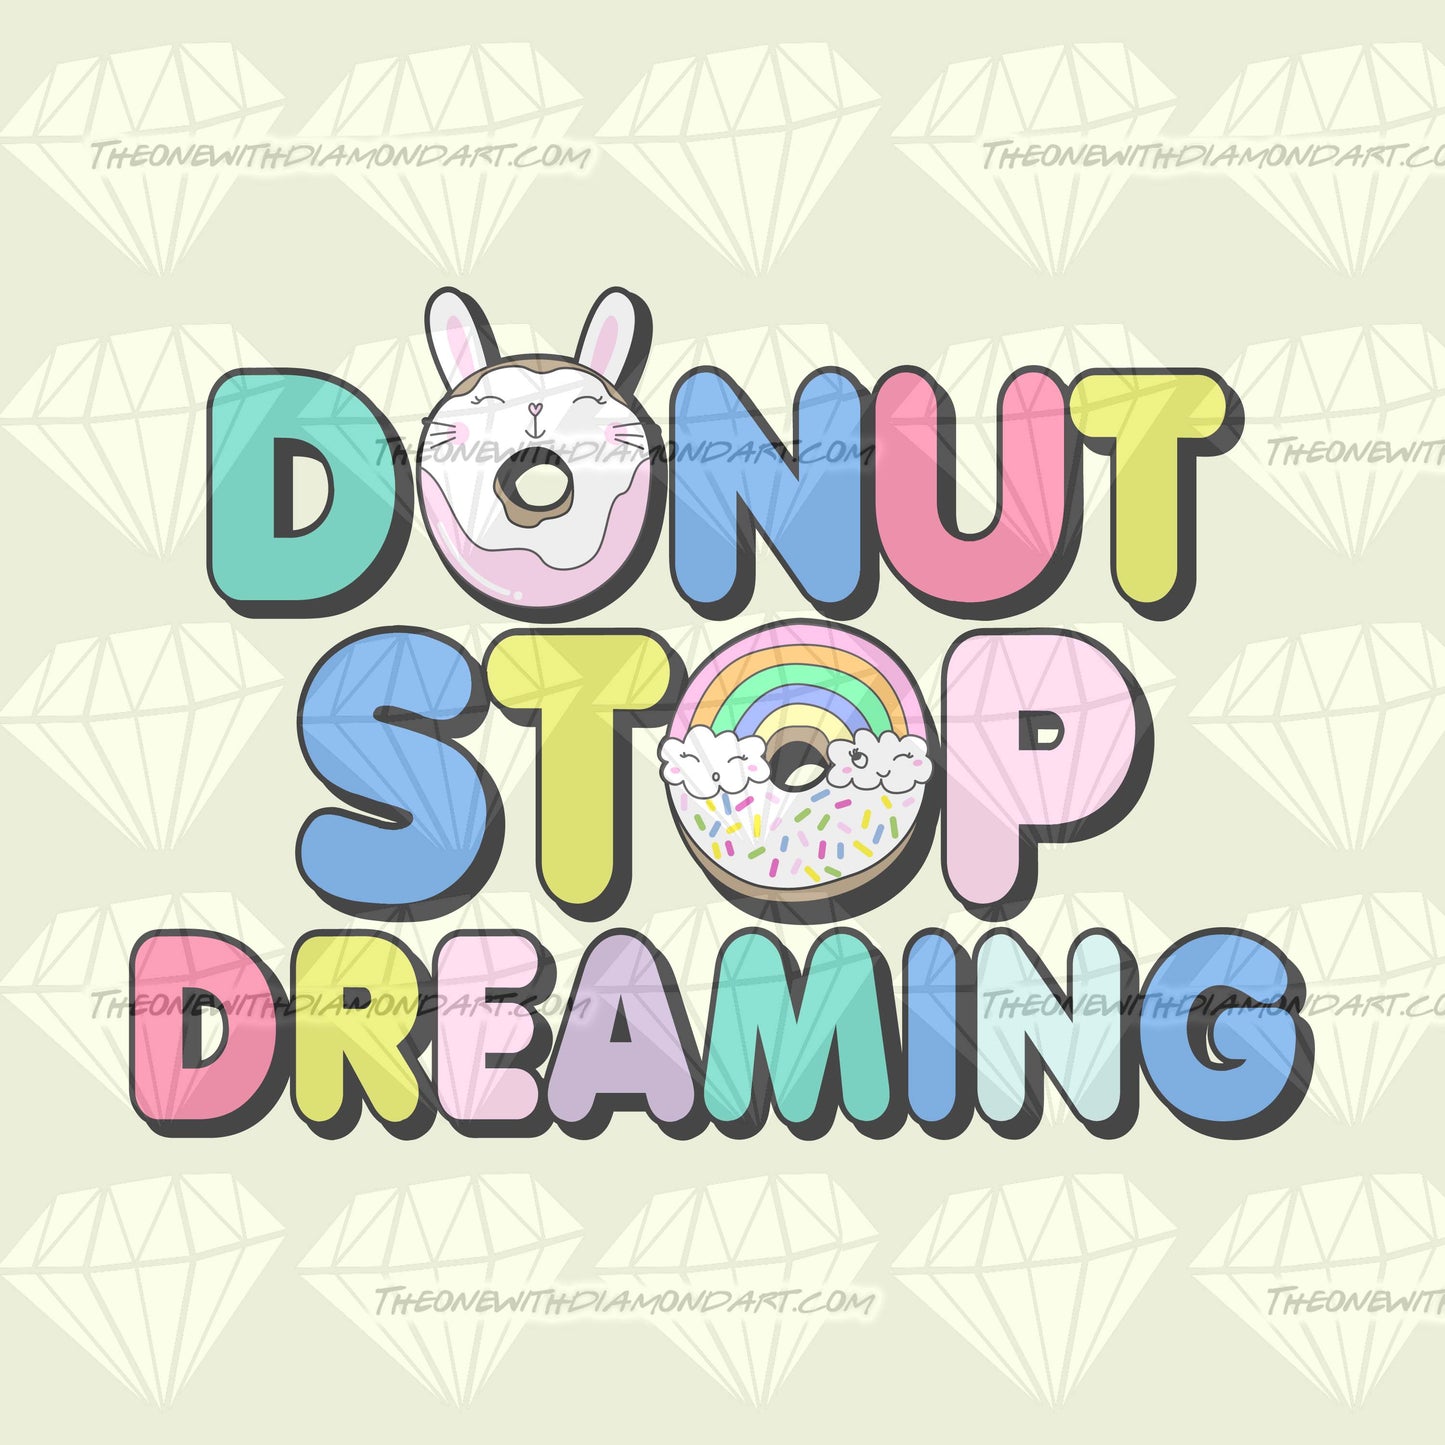 Donut Stop Dreaming